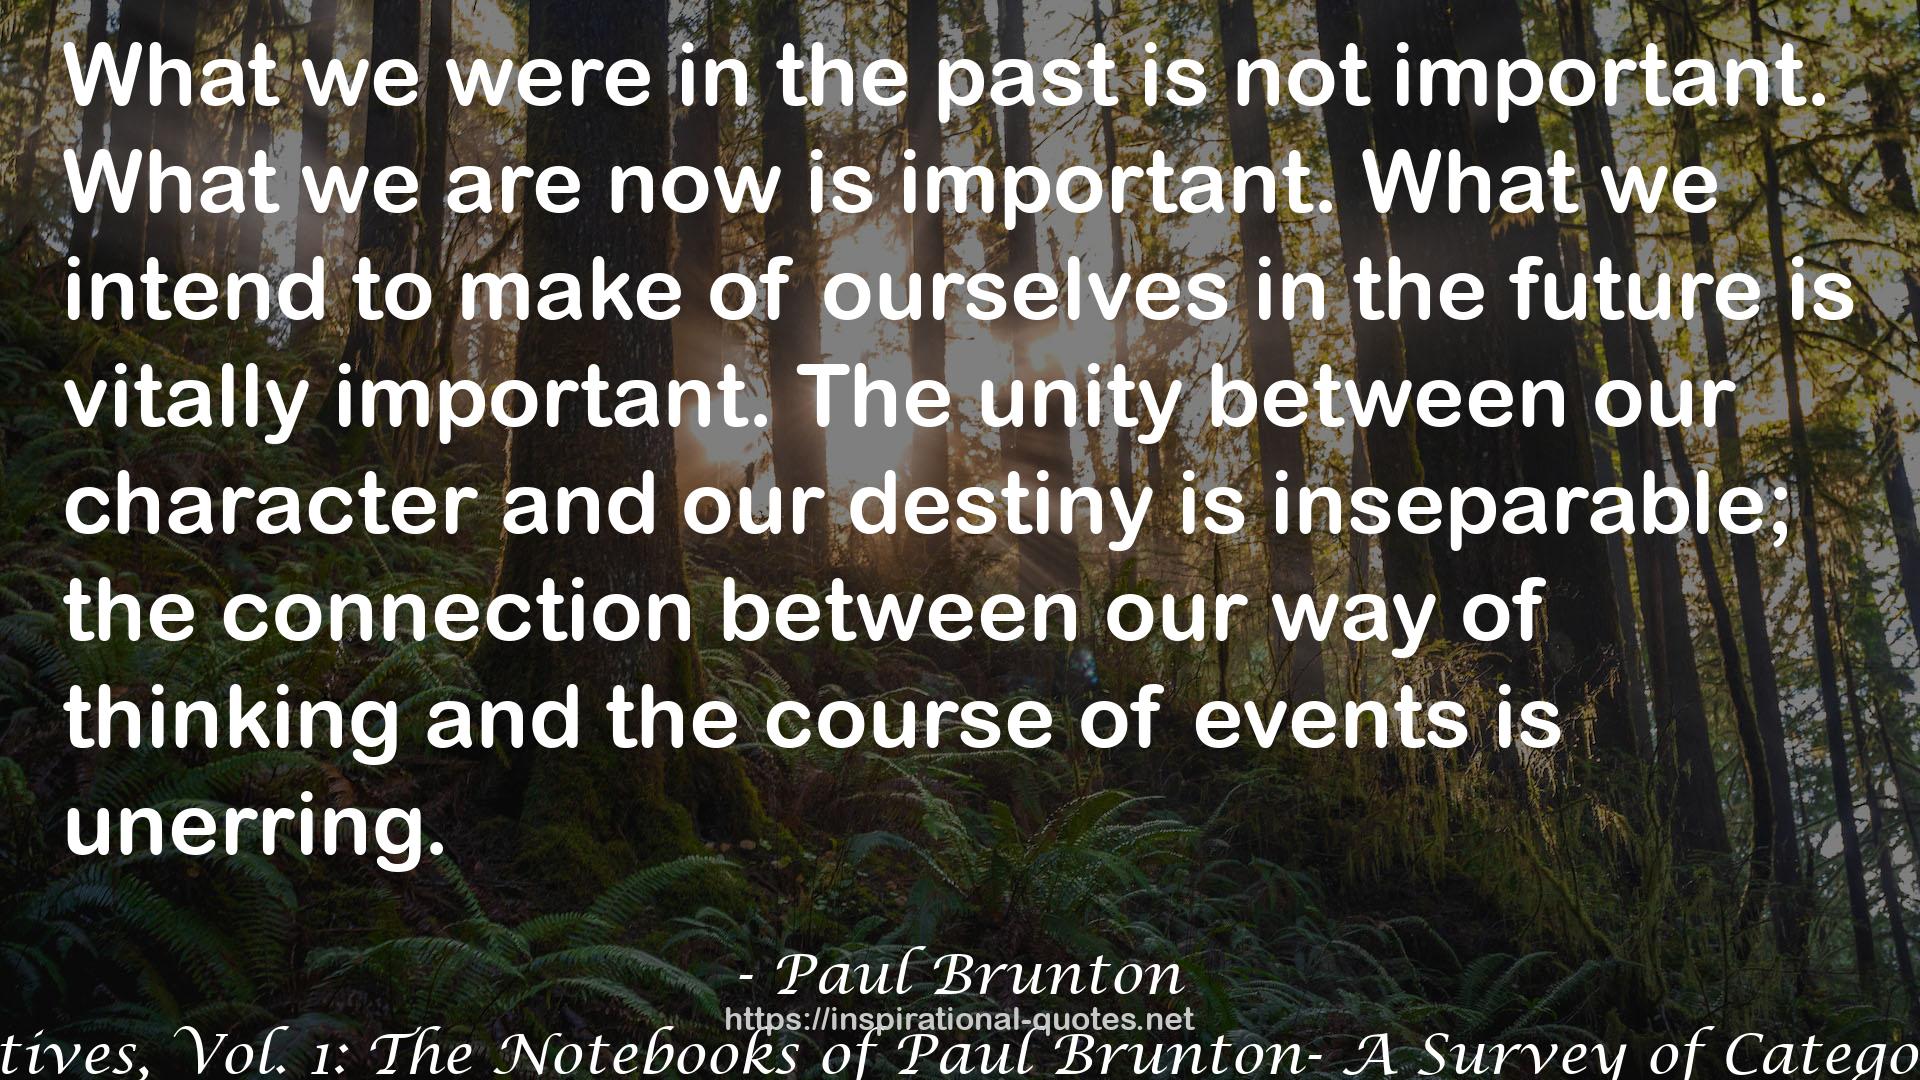 Perspectives, Vol. 1: The Notebooks of Paul Brunton- A Survey of Categories 1-28 QUOTES